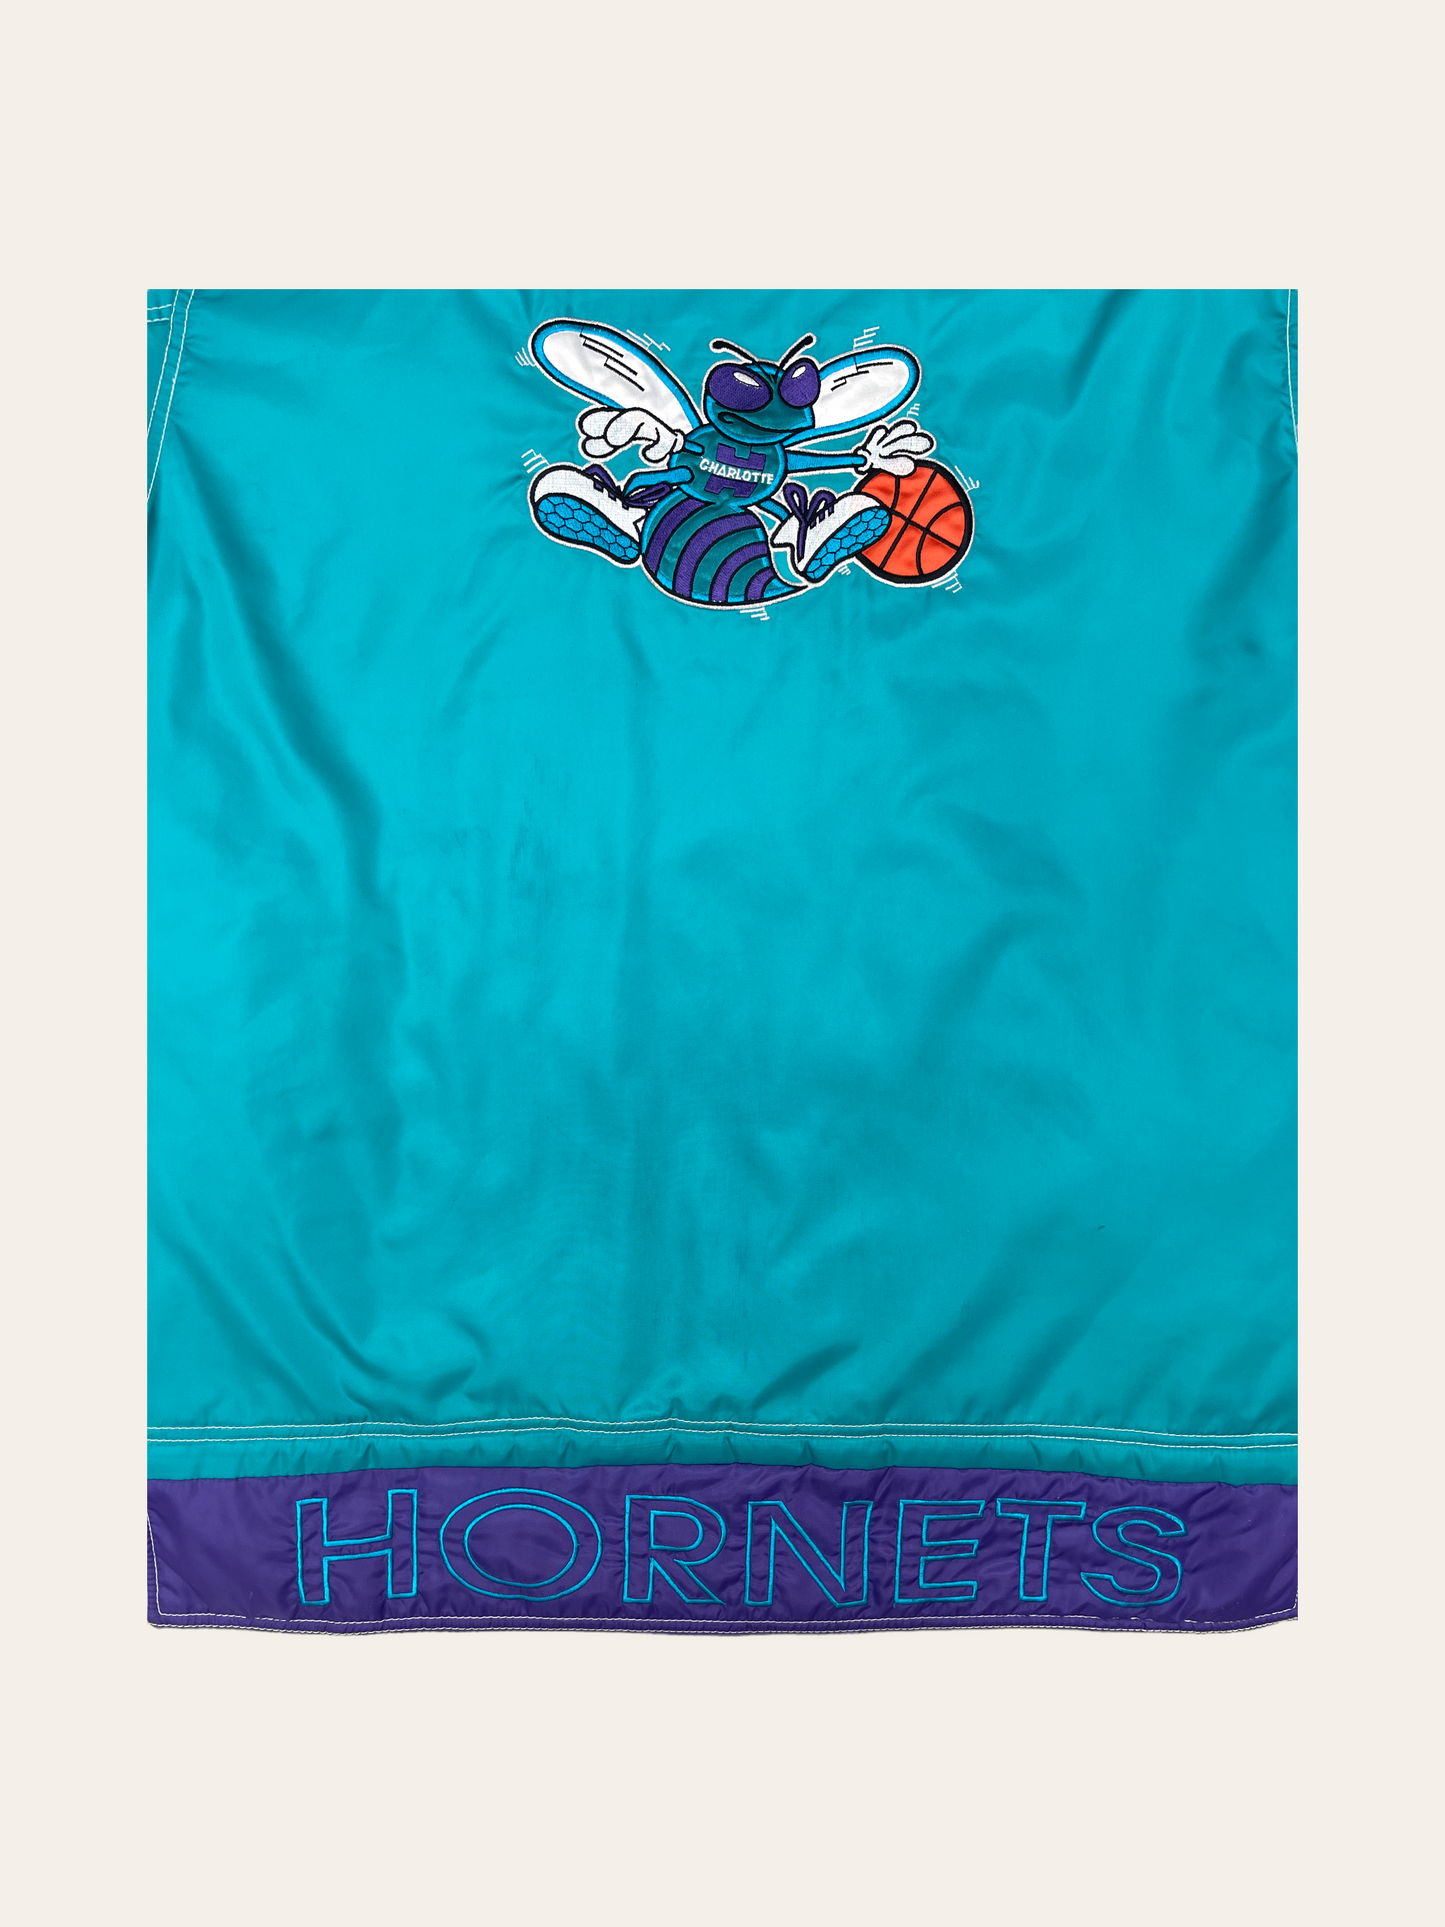 VINTAGE JACKET NBA HORNETTS OFFICIAL TURQUOISE - M